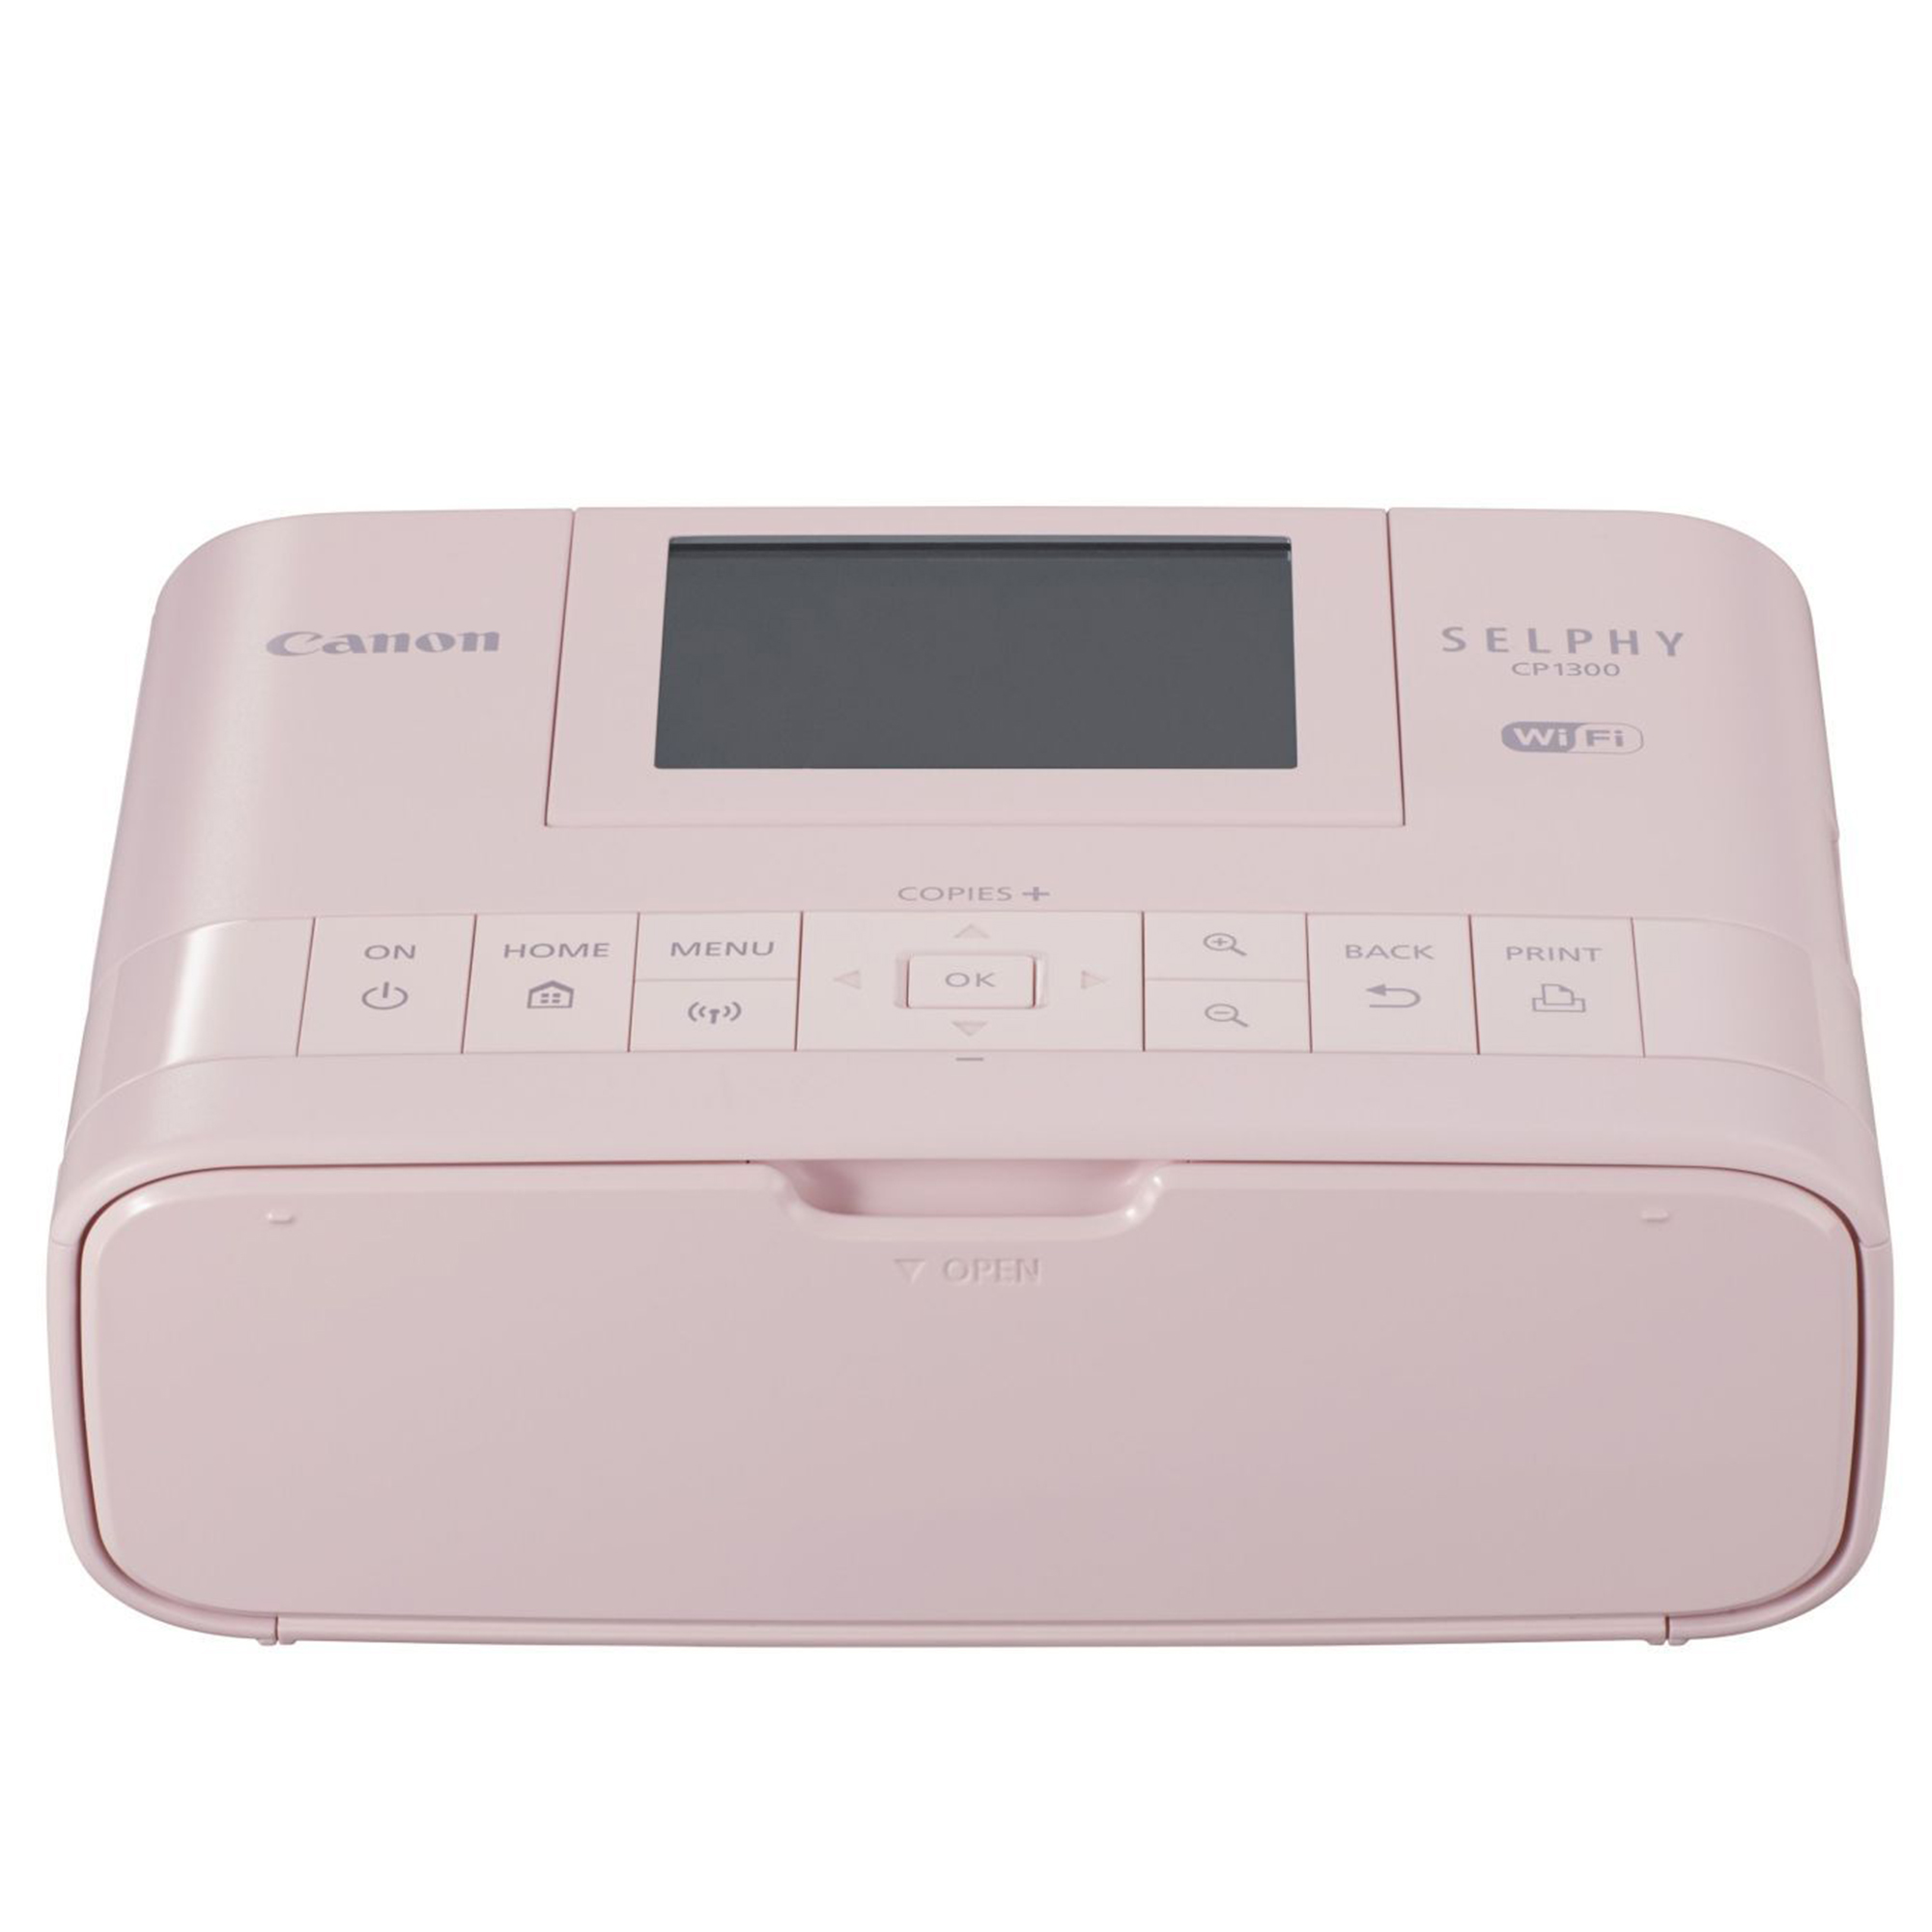 CANON SELPHY CP1300 COMPACT PHOTO PRINTER Pink